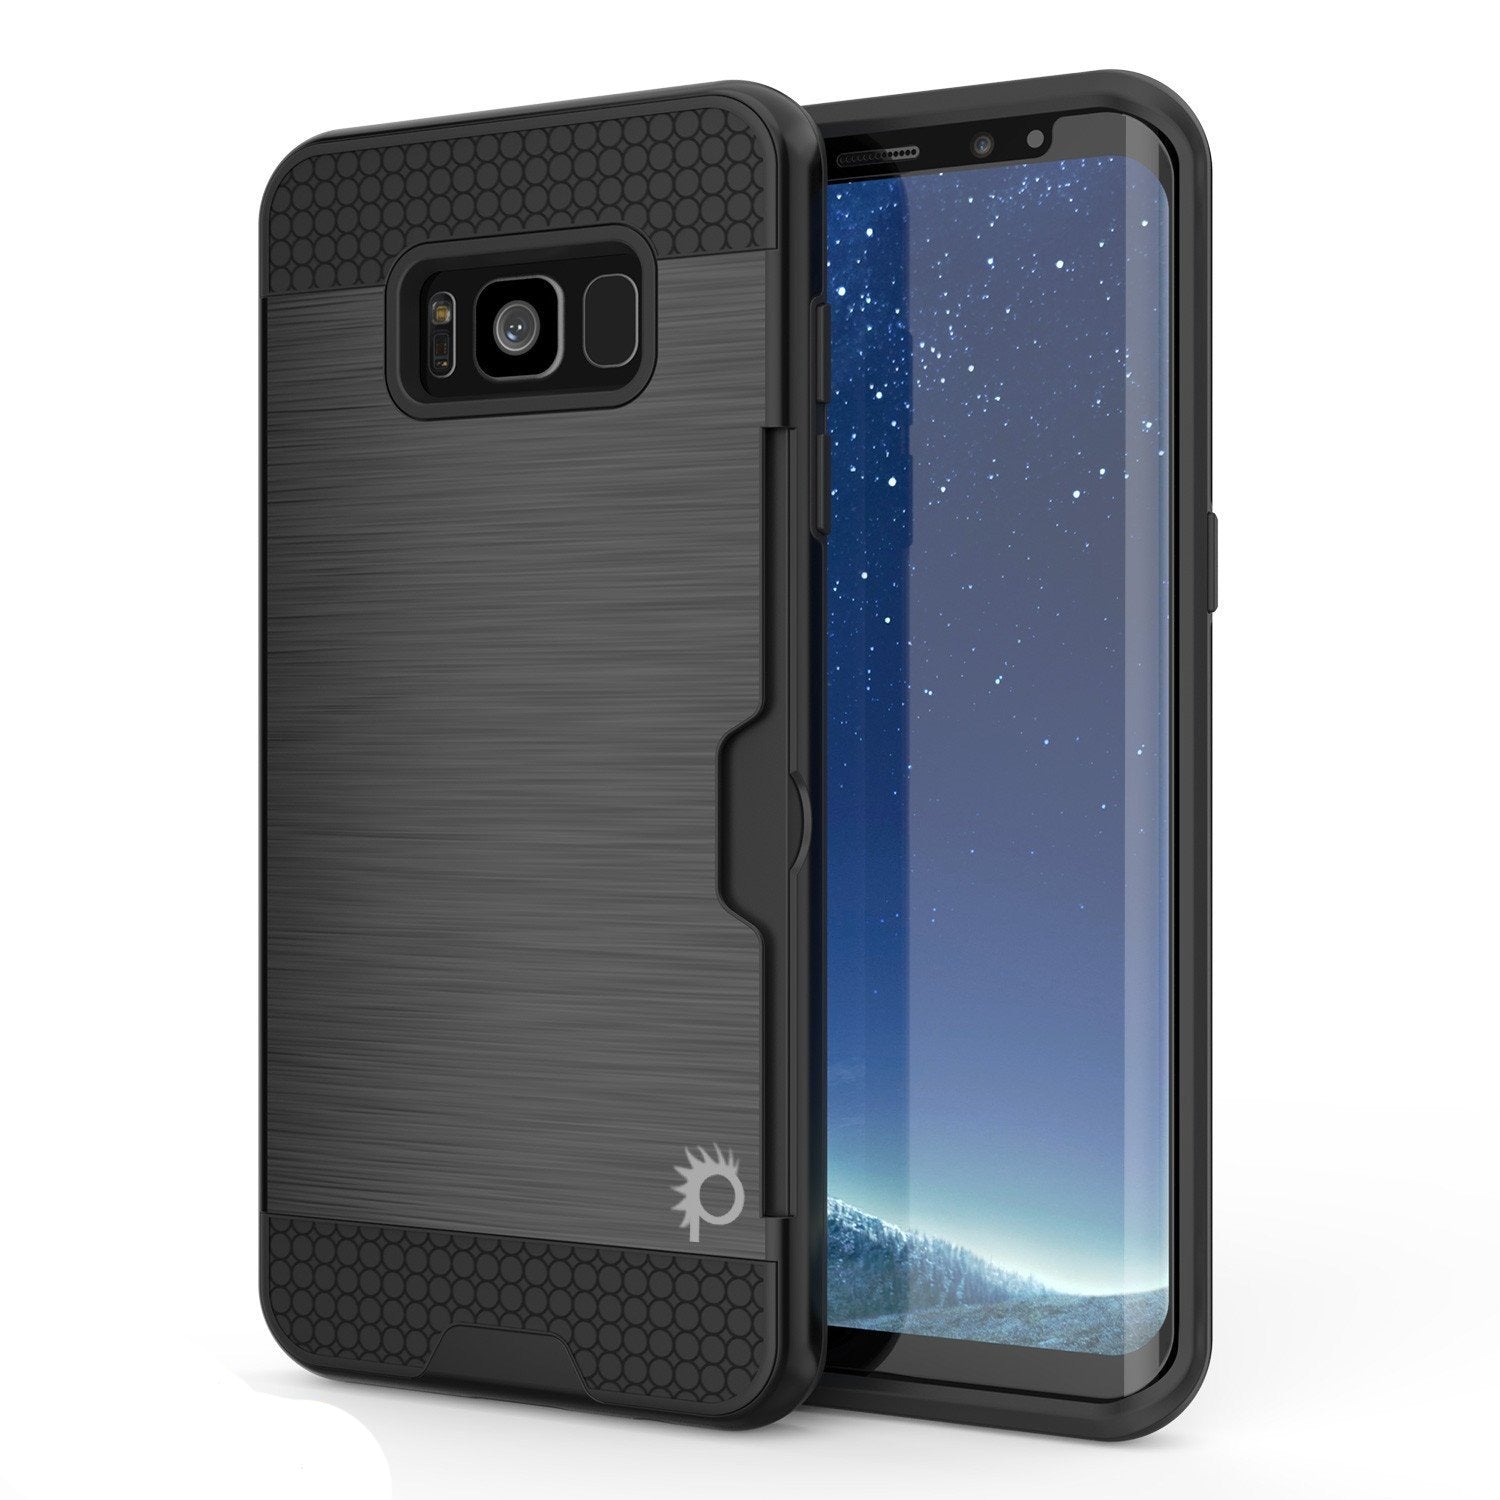 Galaxy S8 Case, PUNKcase [SLOT Series] [Slim Fit] Dual-Layer Armor Cover w/Integrated Anti-Shock System, Credit Card Slot & PUNKSHIELD Screen Protector for Samsung Galaxy S8 [Black]